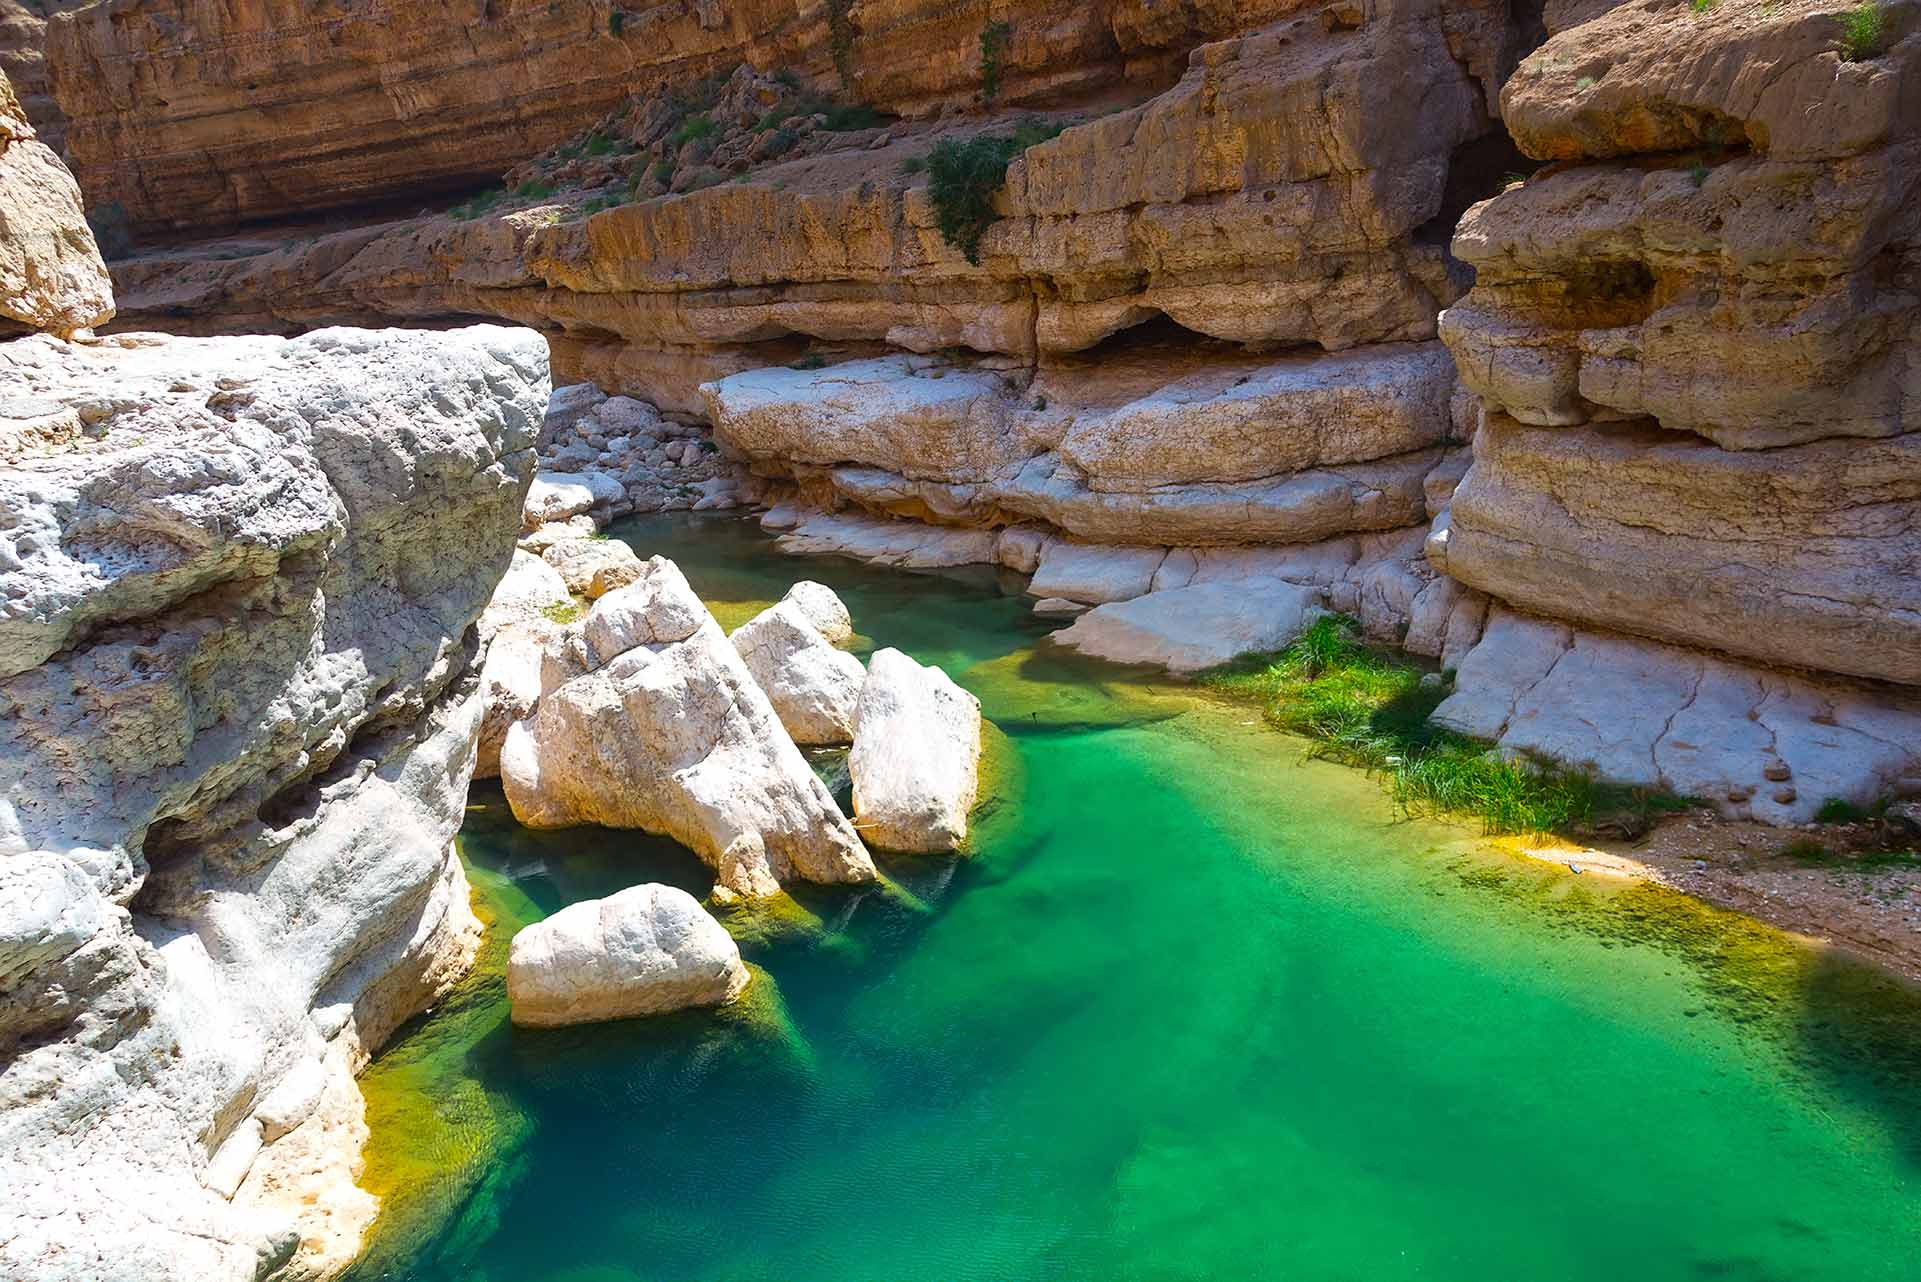 The Wadi Shab with emerald green water, one of the most famous and amazing wadi (valley) in Oman